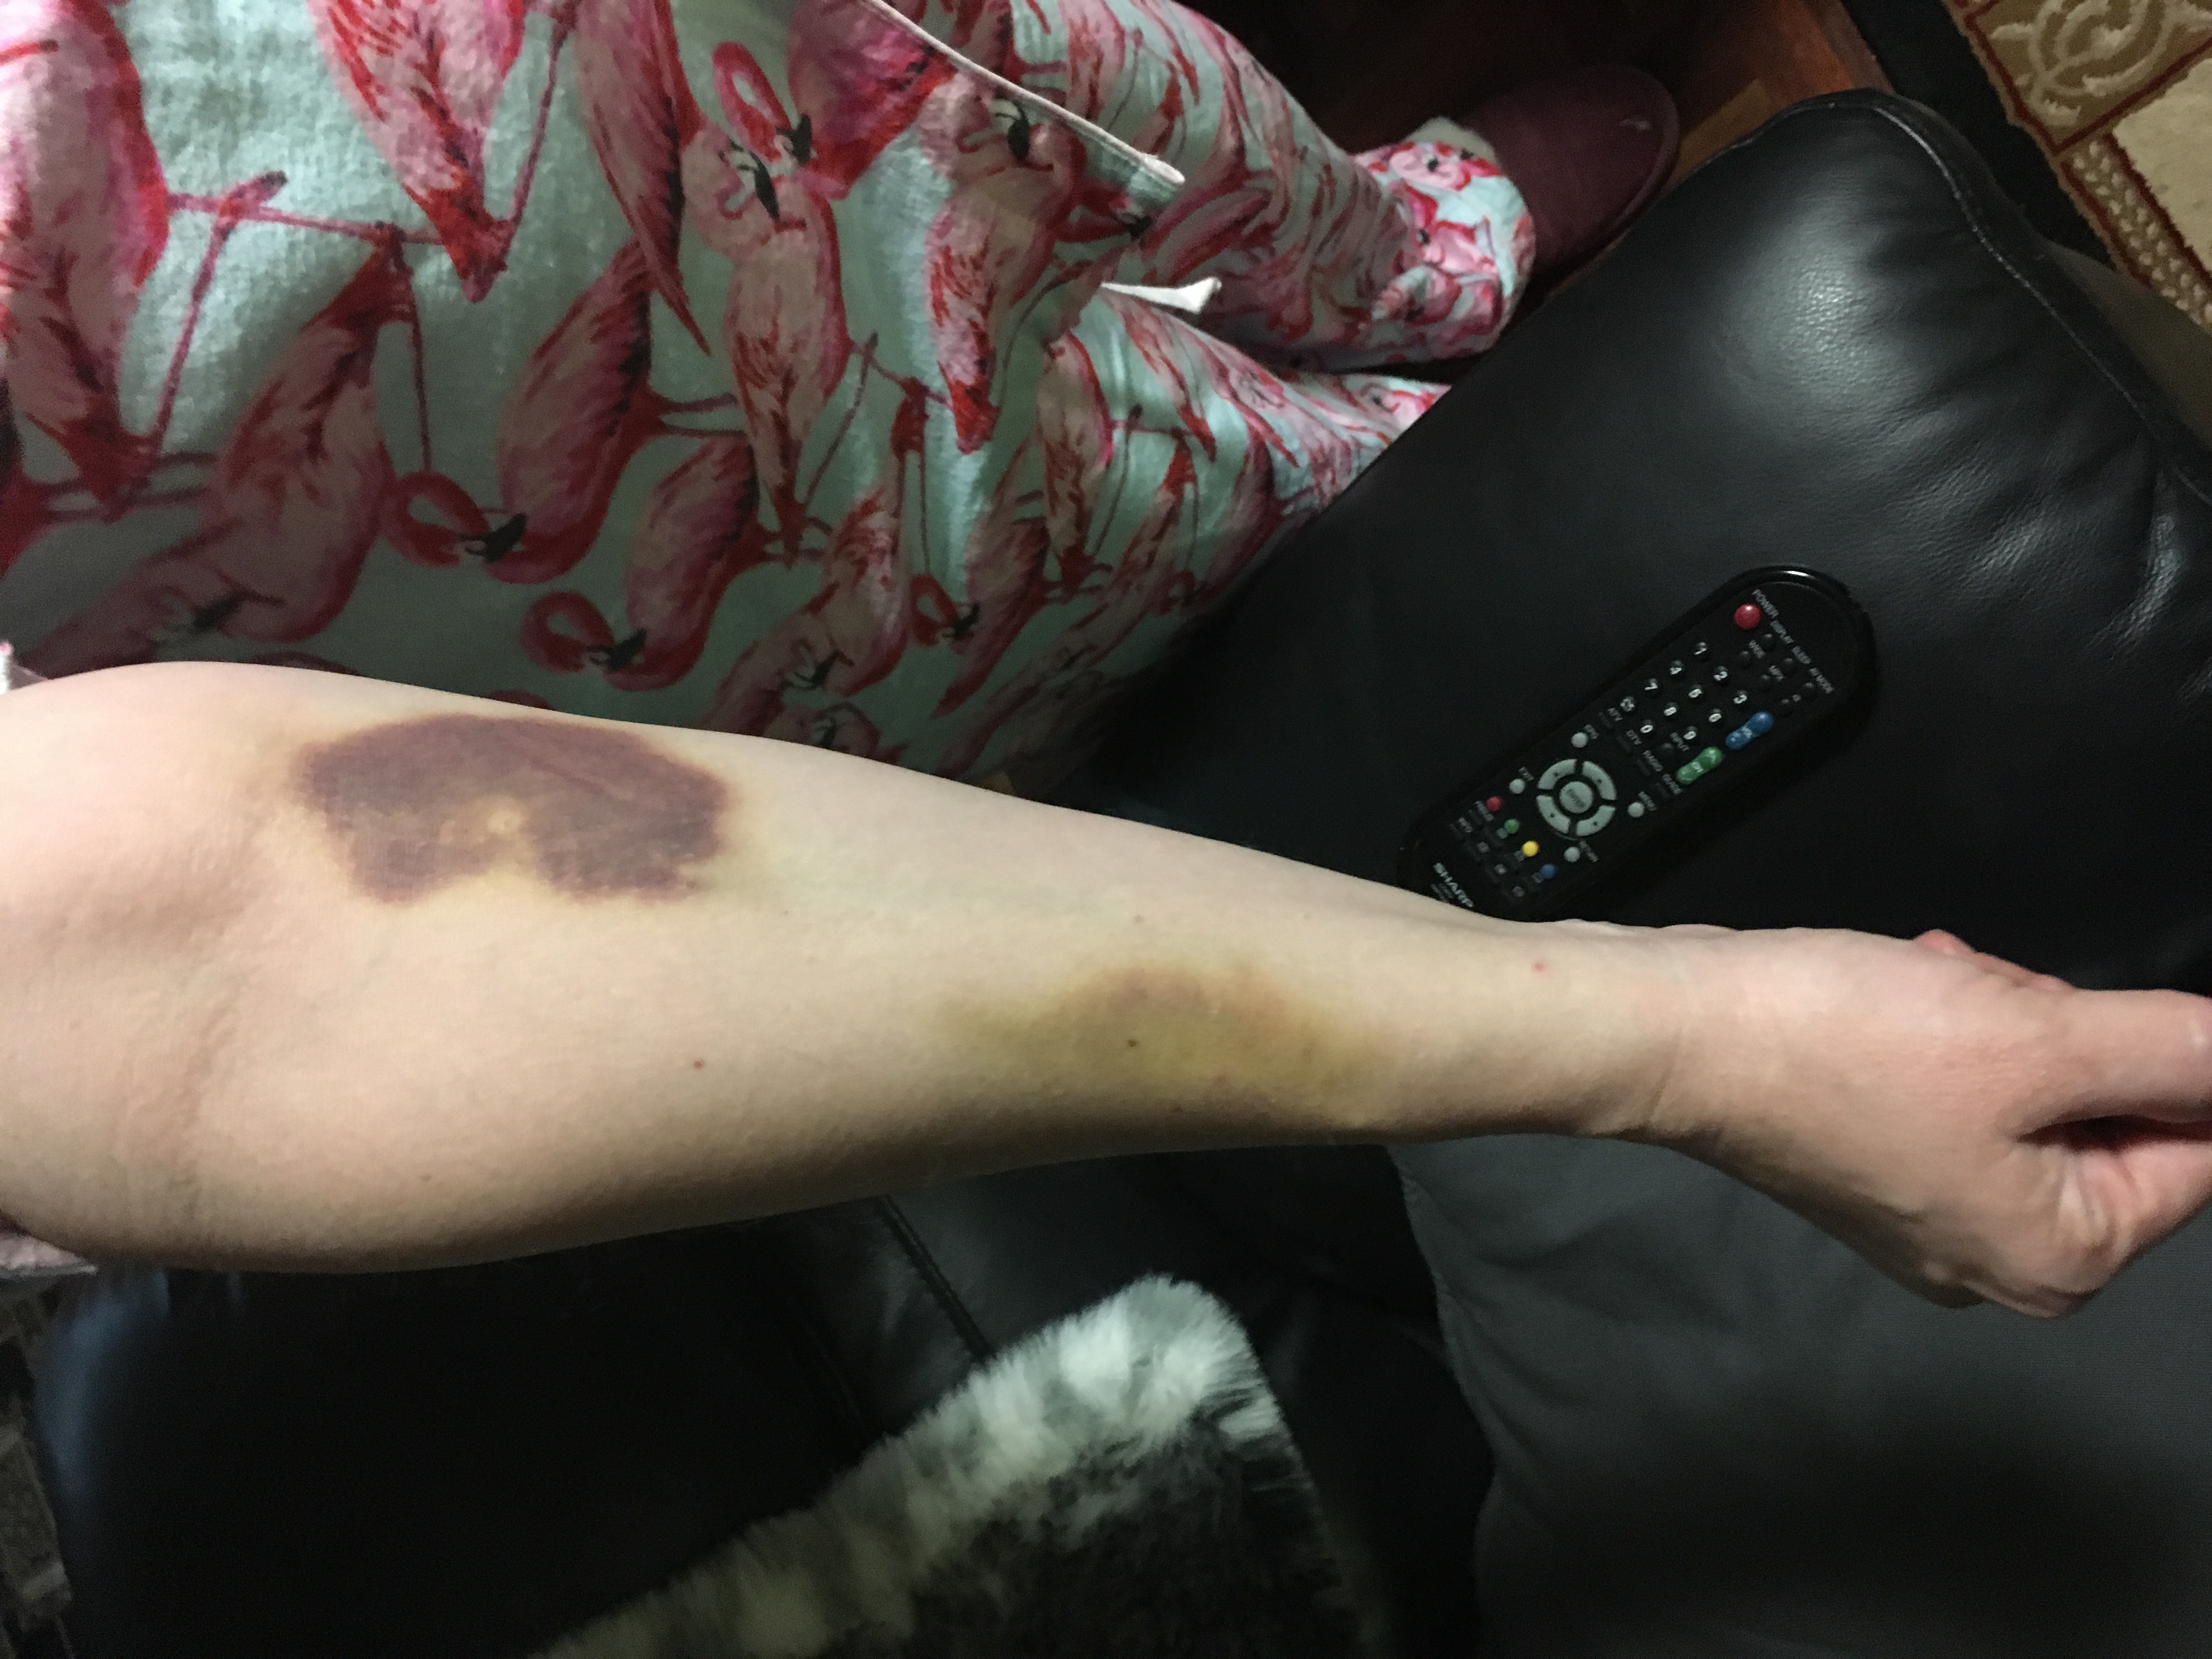 The result of two collapsed veins during IV insertion, 10 days later